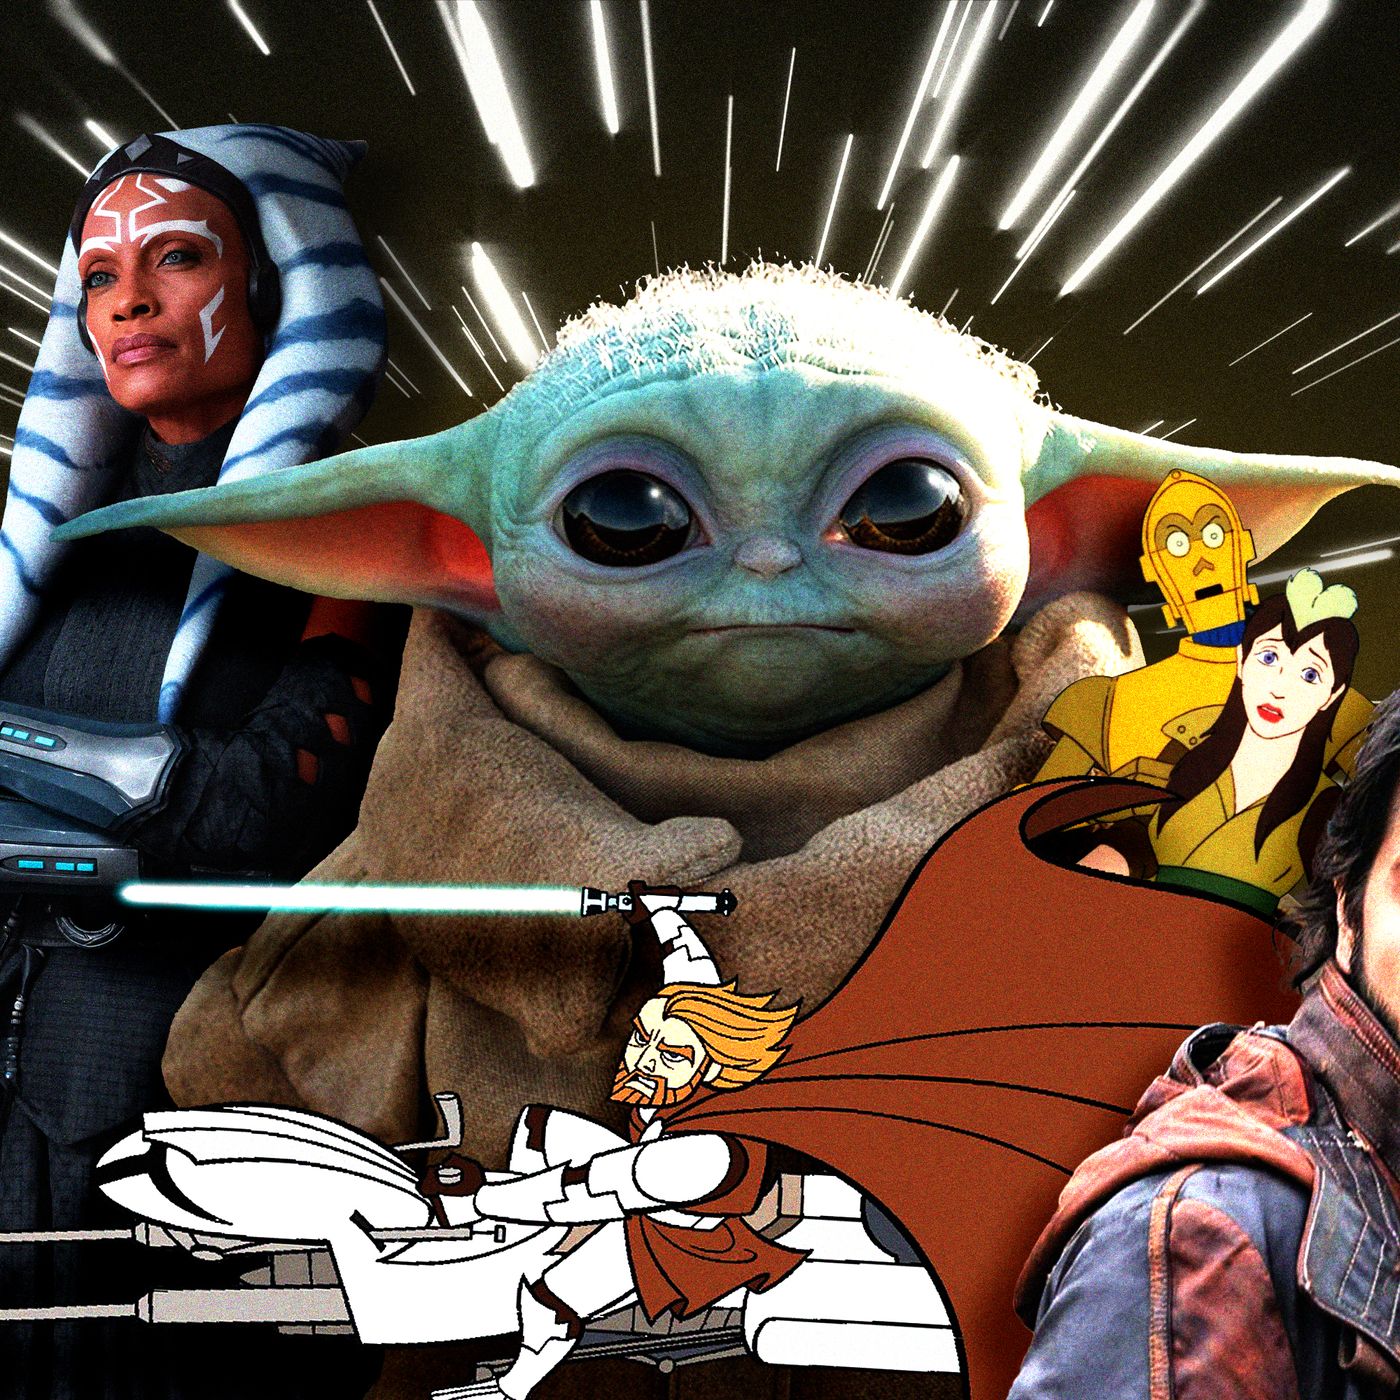 Tales of the Jedi cast, Every voice actor in Star Wars series